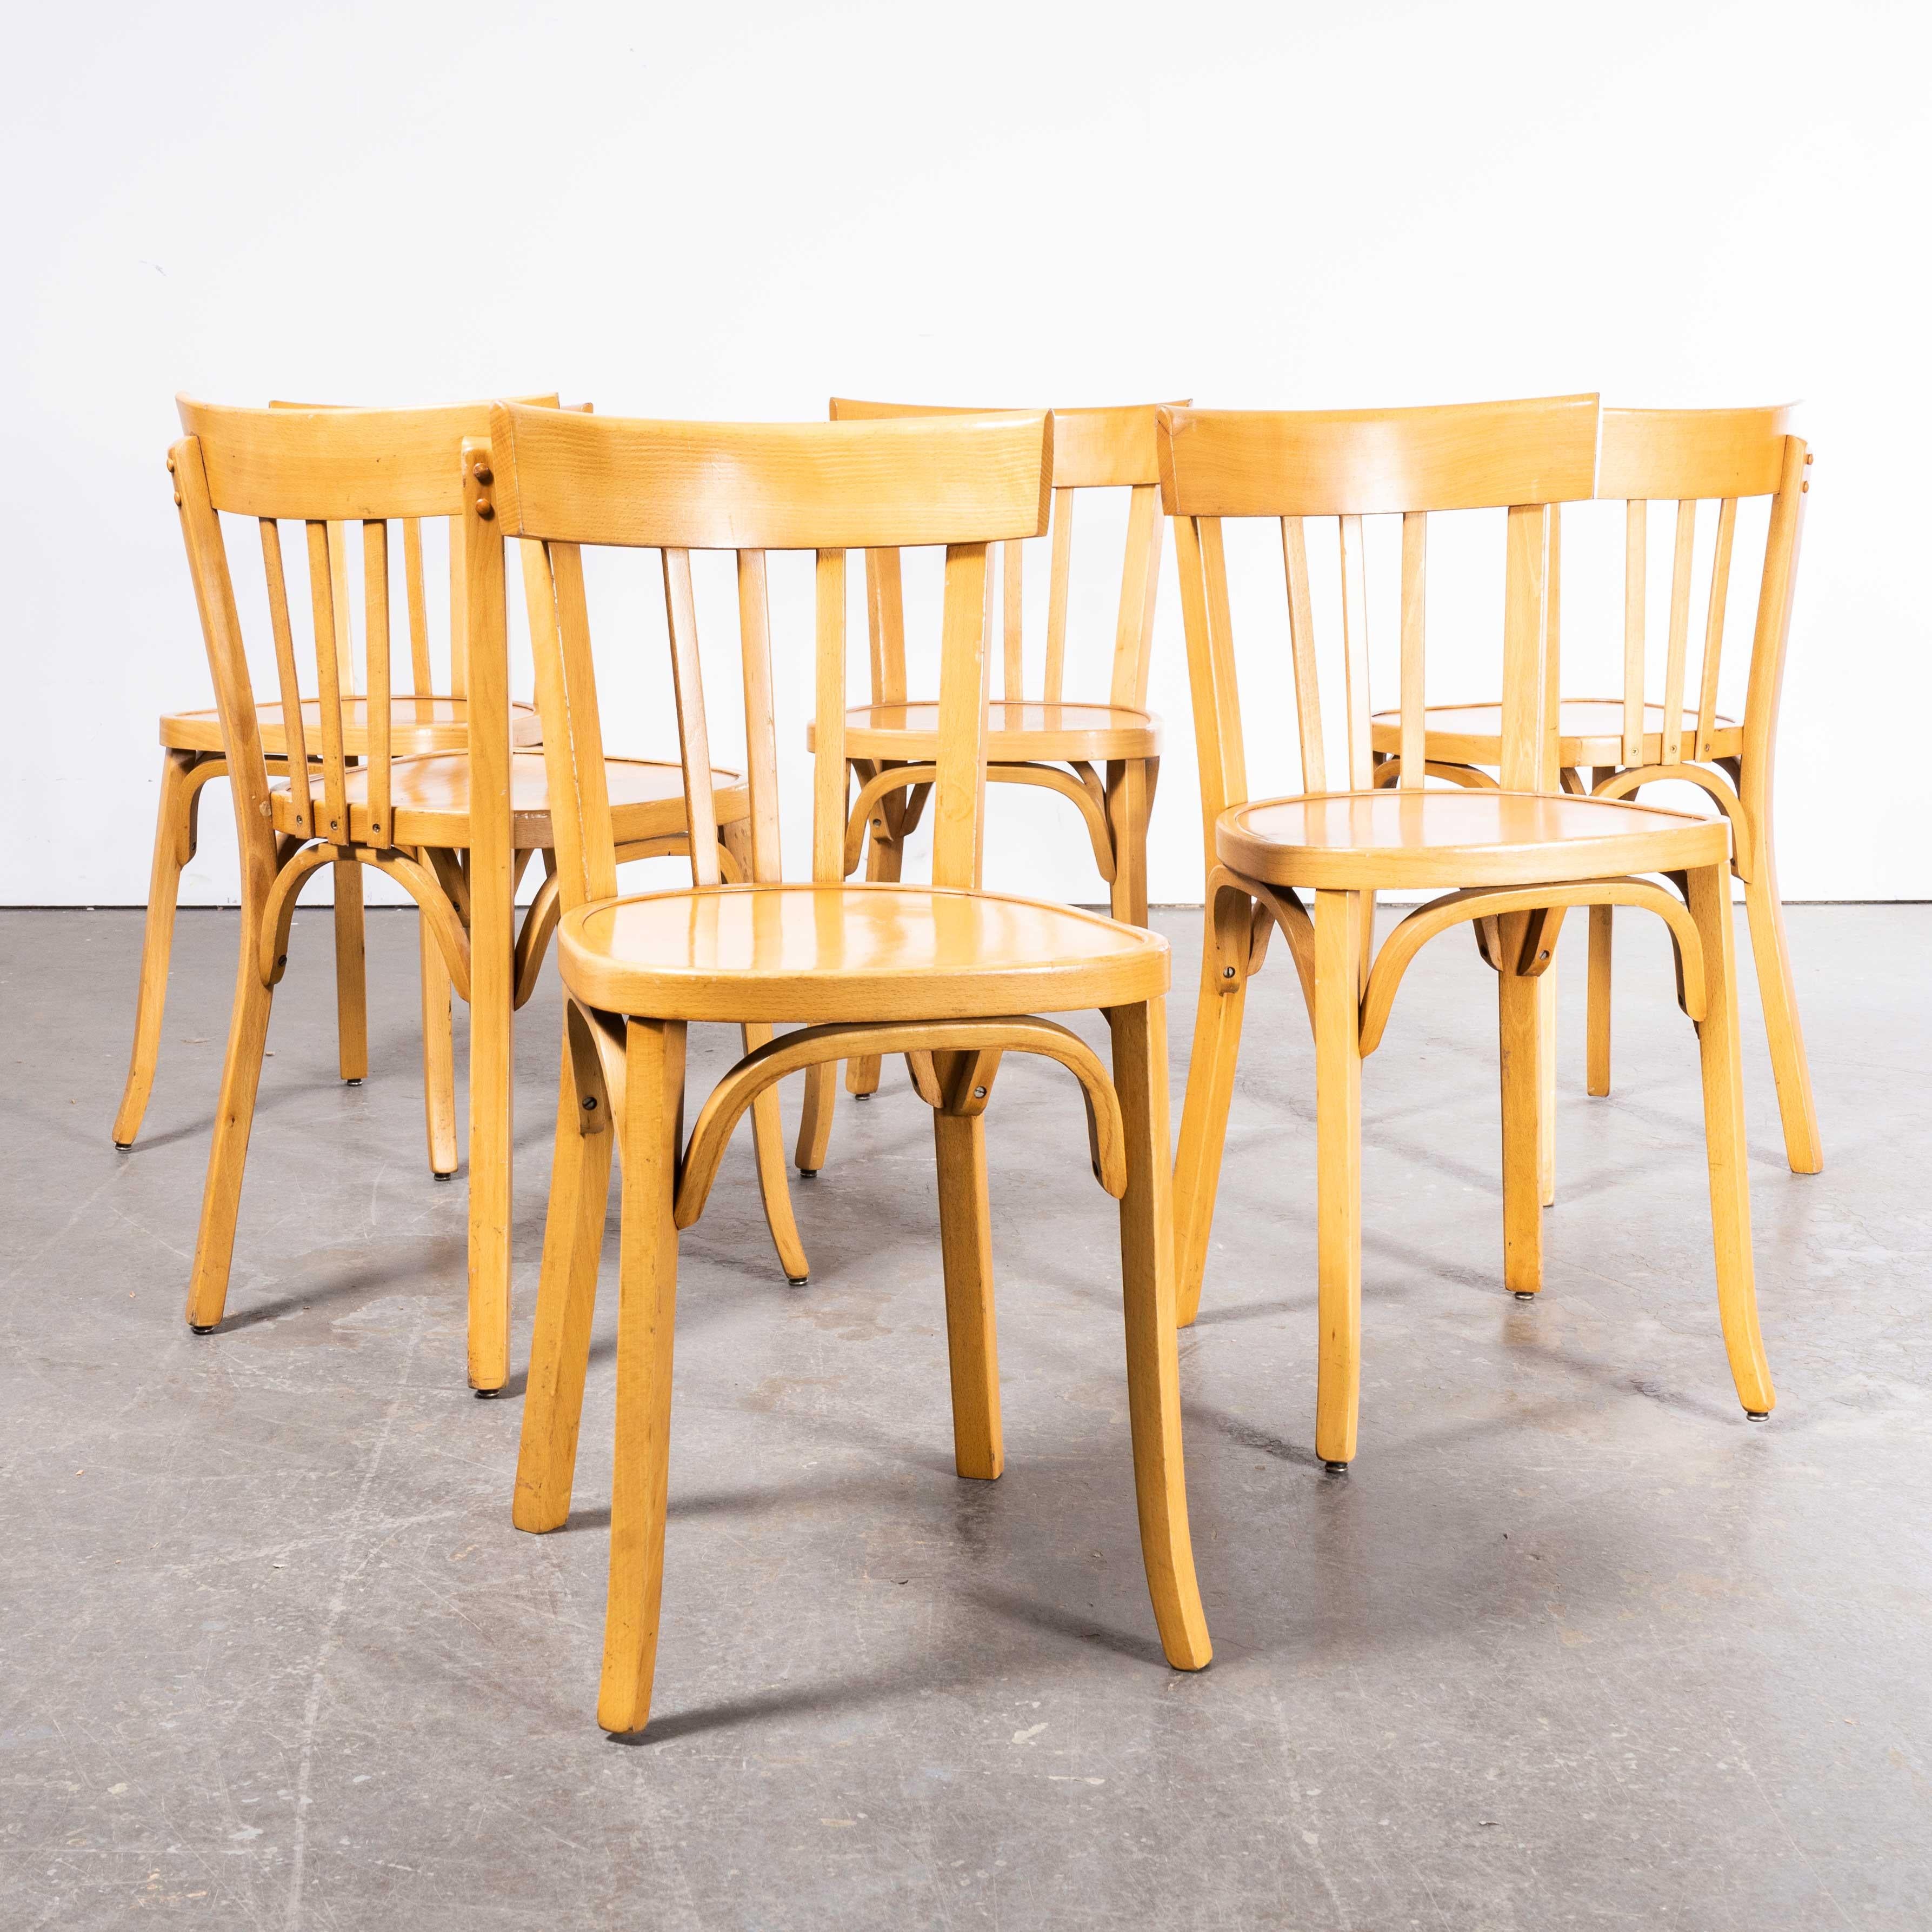 1950’s Baumann Bentwood Tri Back Dining Chair – Bleached – Set Of Six
1950’s Baumann Bentwood Tri Back Dining Chair – Honey – Set Of Six. Classic Beech bistro chair made in France by the maker Baumann. Baumann is a slightly off the radar French